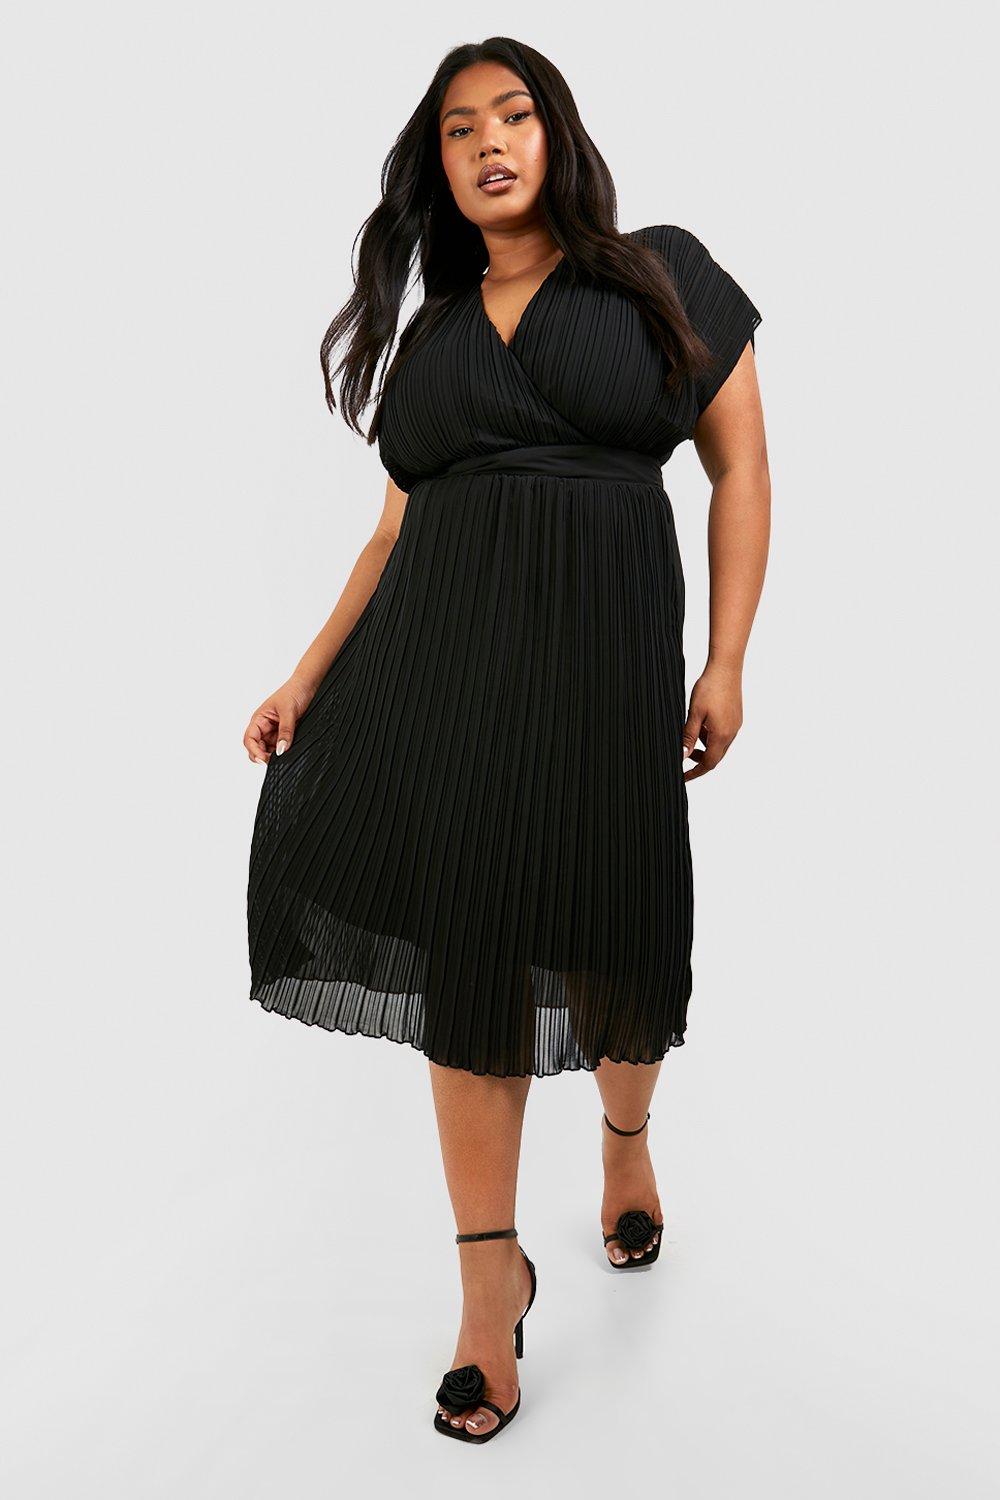 Plus Size Occasion Outfits ...